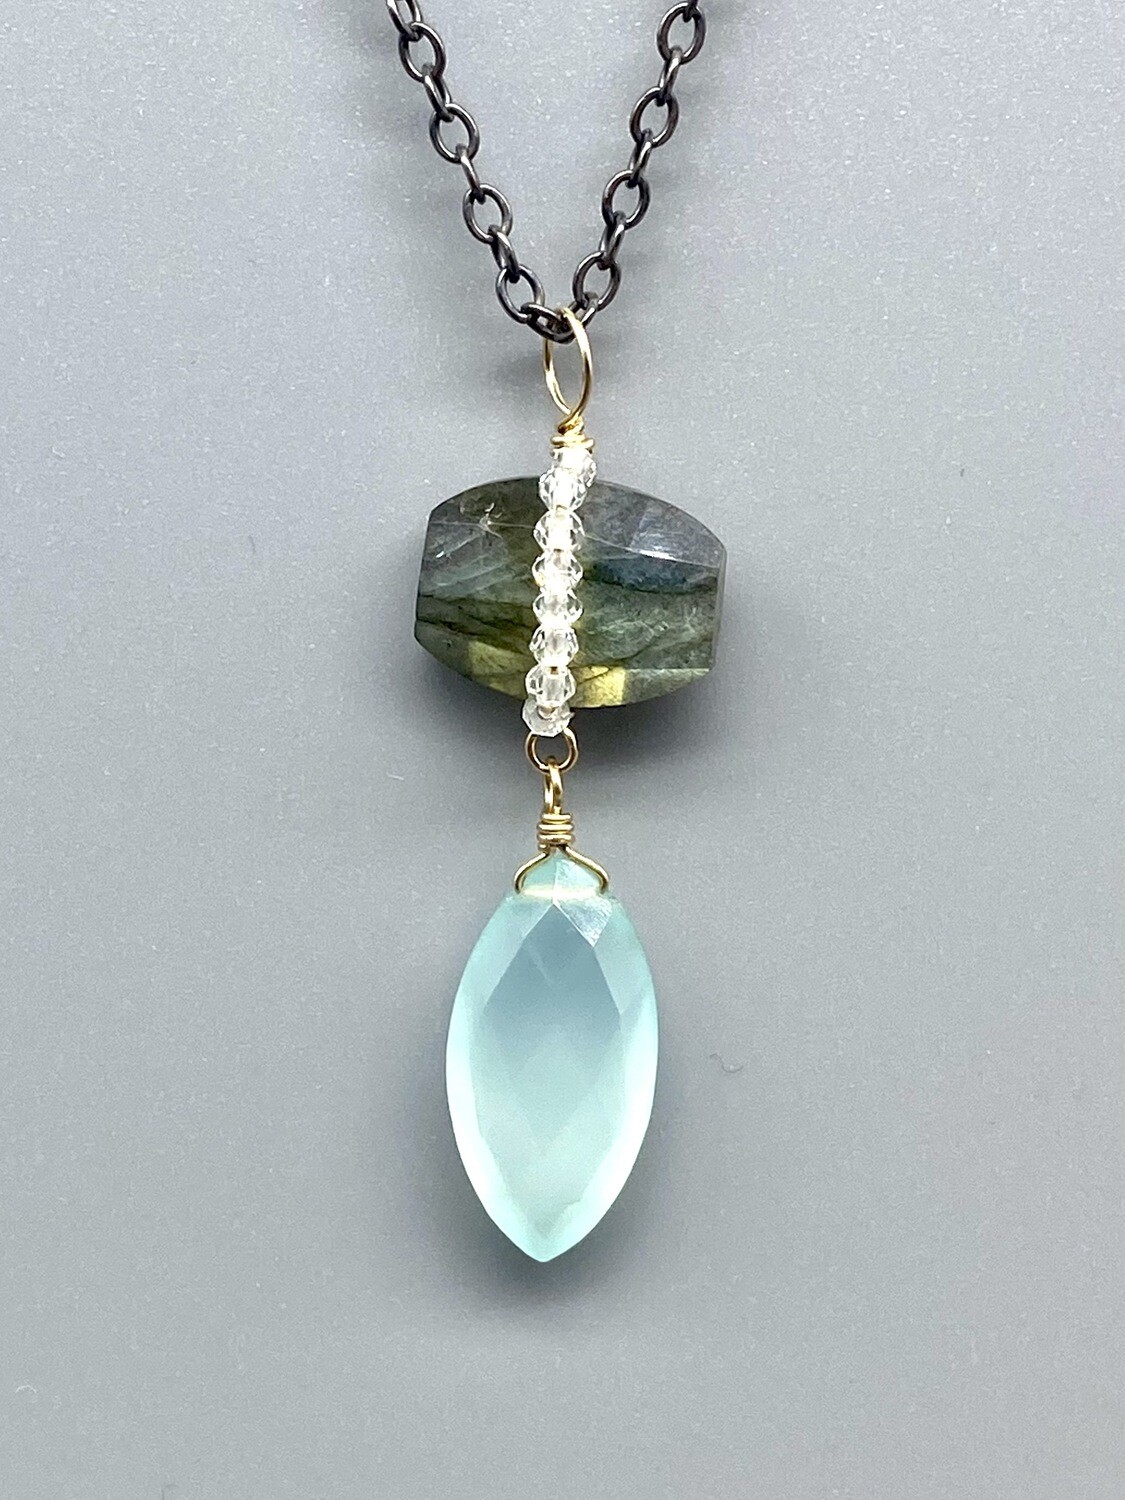 SN161 - Labradorite and Chalcedony Necklace, SS and Vermeil - Calliope - Seattle, WA